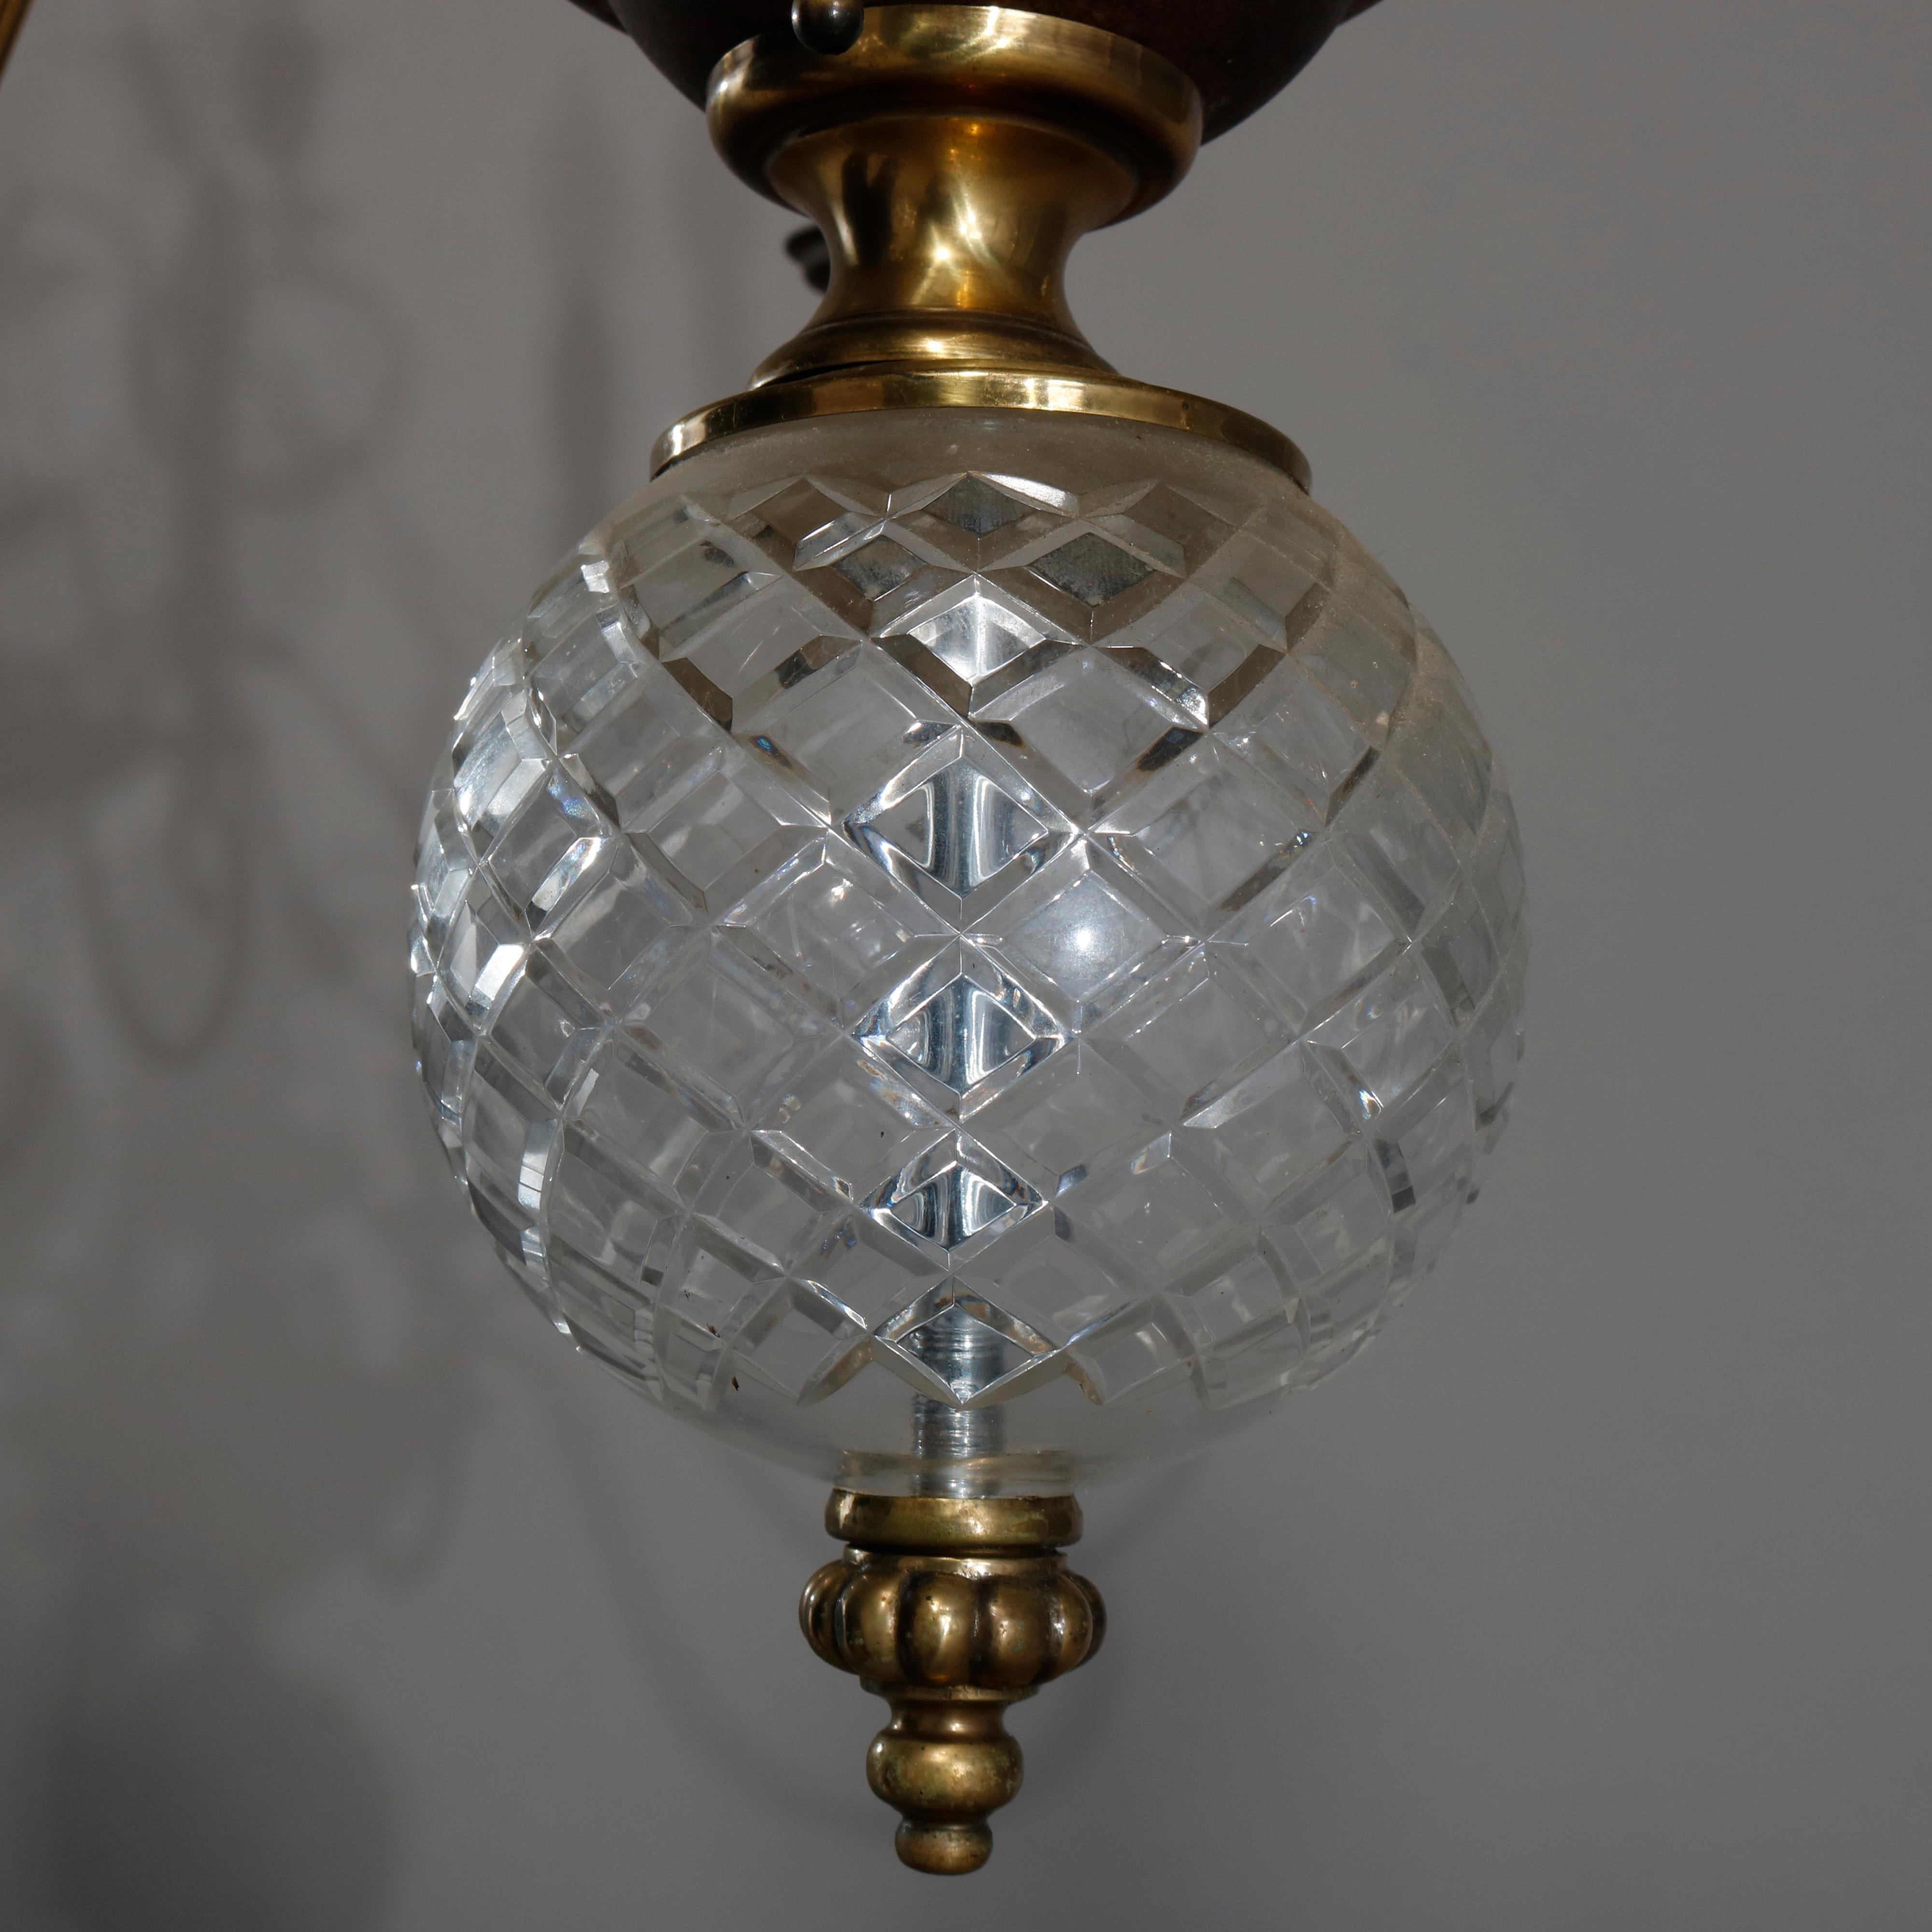 Vintage French Nine-Light Tiered Brass and Crystal Chandelier, 20th Century For Sale 6